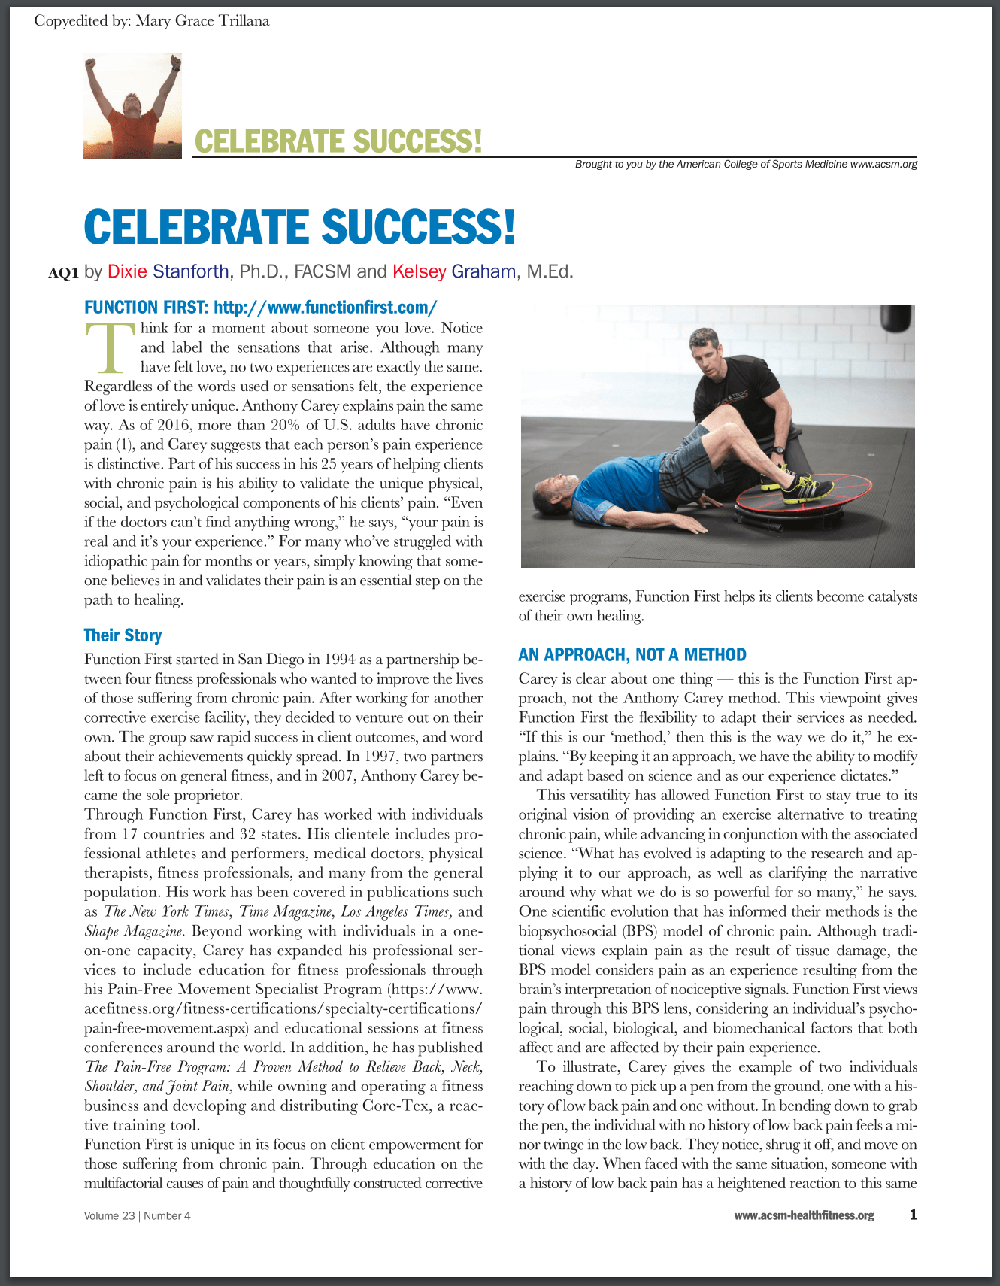 ACSM HEALTH & FITNESS JOURNAL JULY/AUGUST 2019: The Function First Story